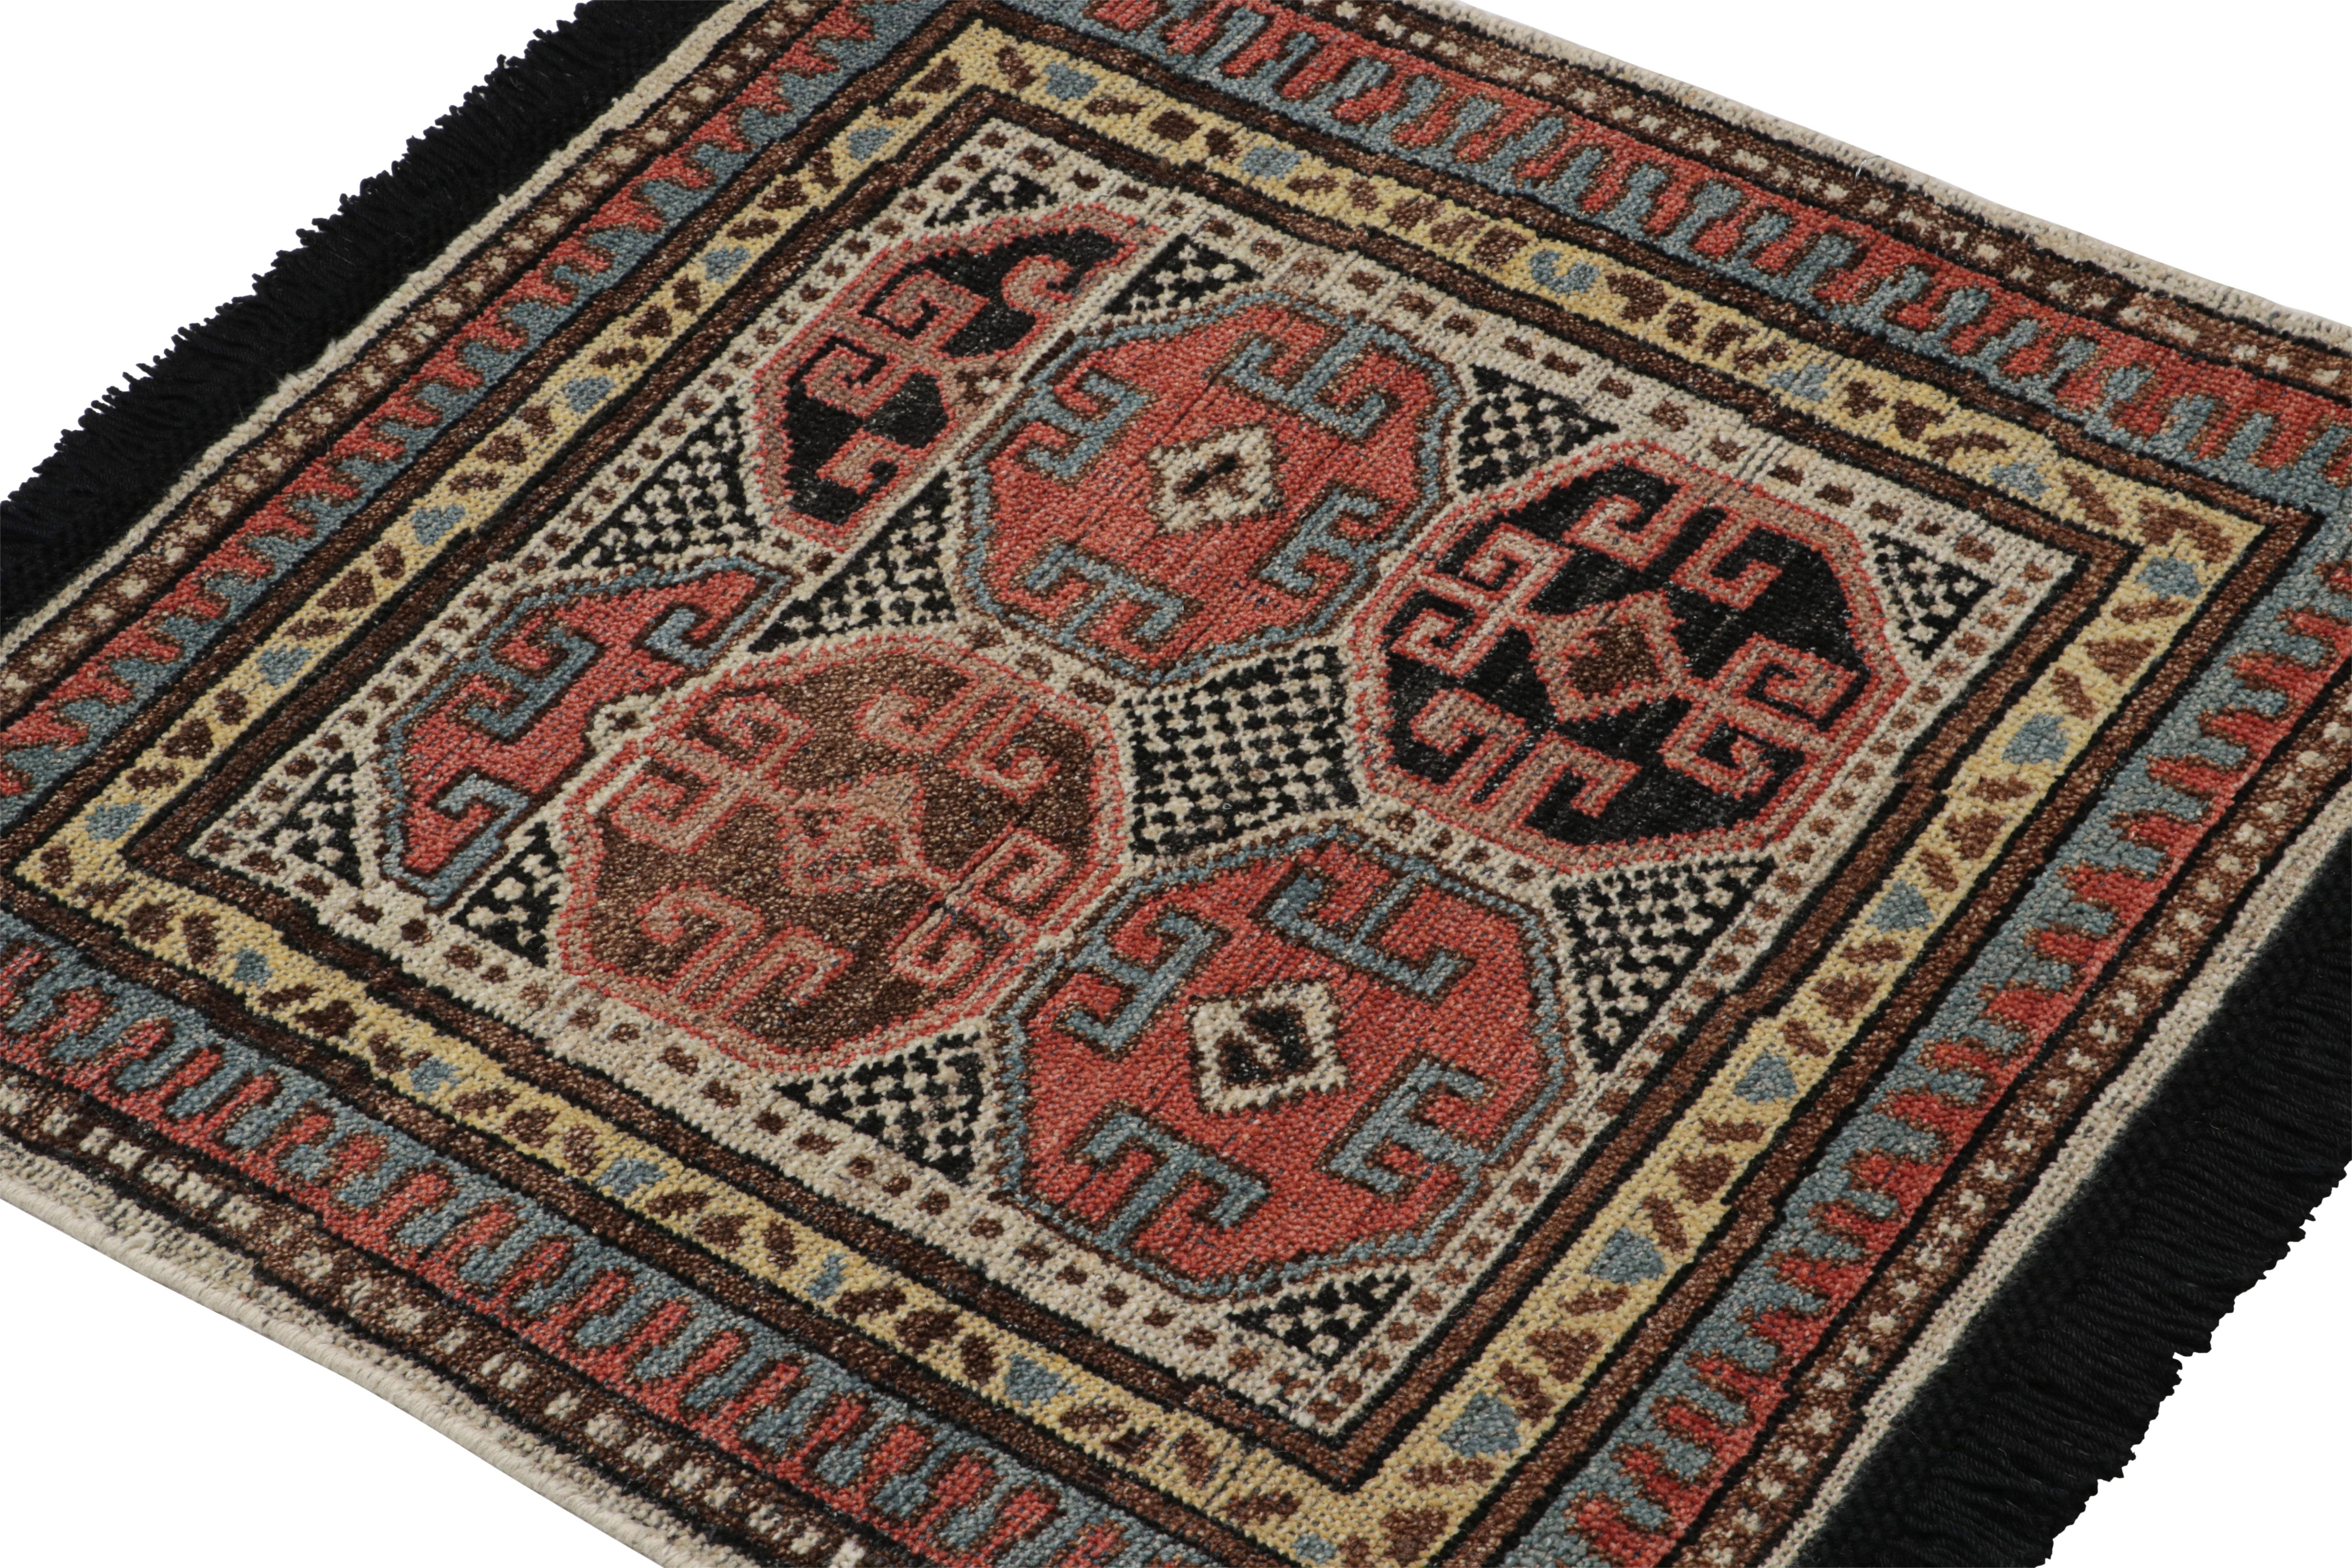 Inspired by antique tribal rugs of Turkish and Caucasian provenance, particularly in its love of medallions in the geometric gul style, this 2x2 square rug is hand-knotted in wool. 

On the Design: 

Particularly inspired by the nomadic tribal